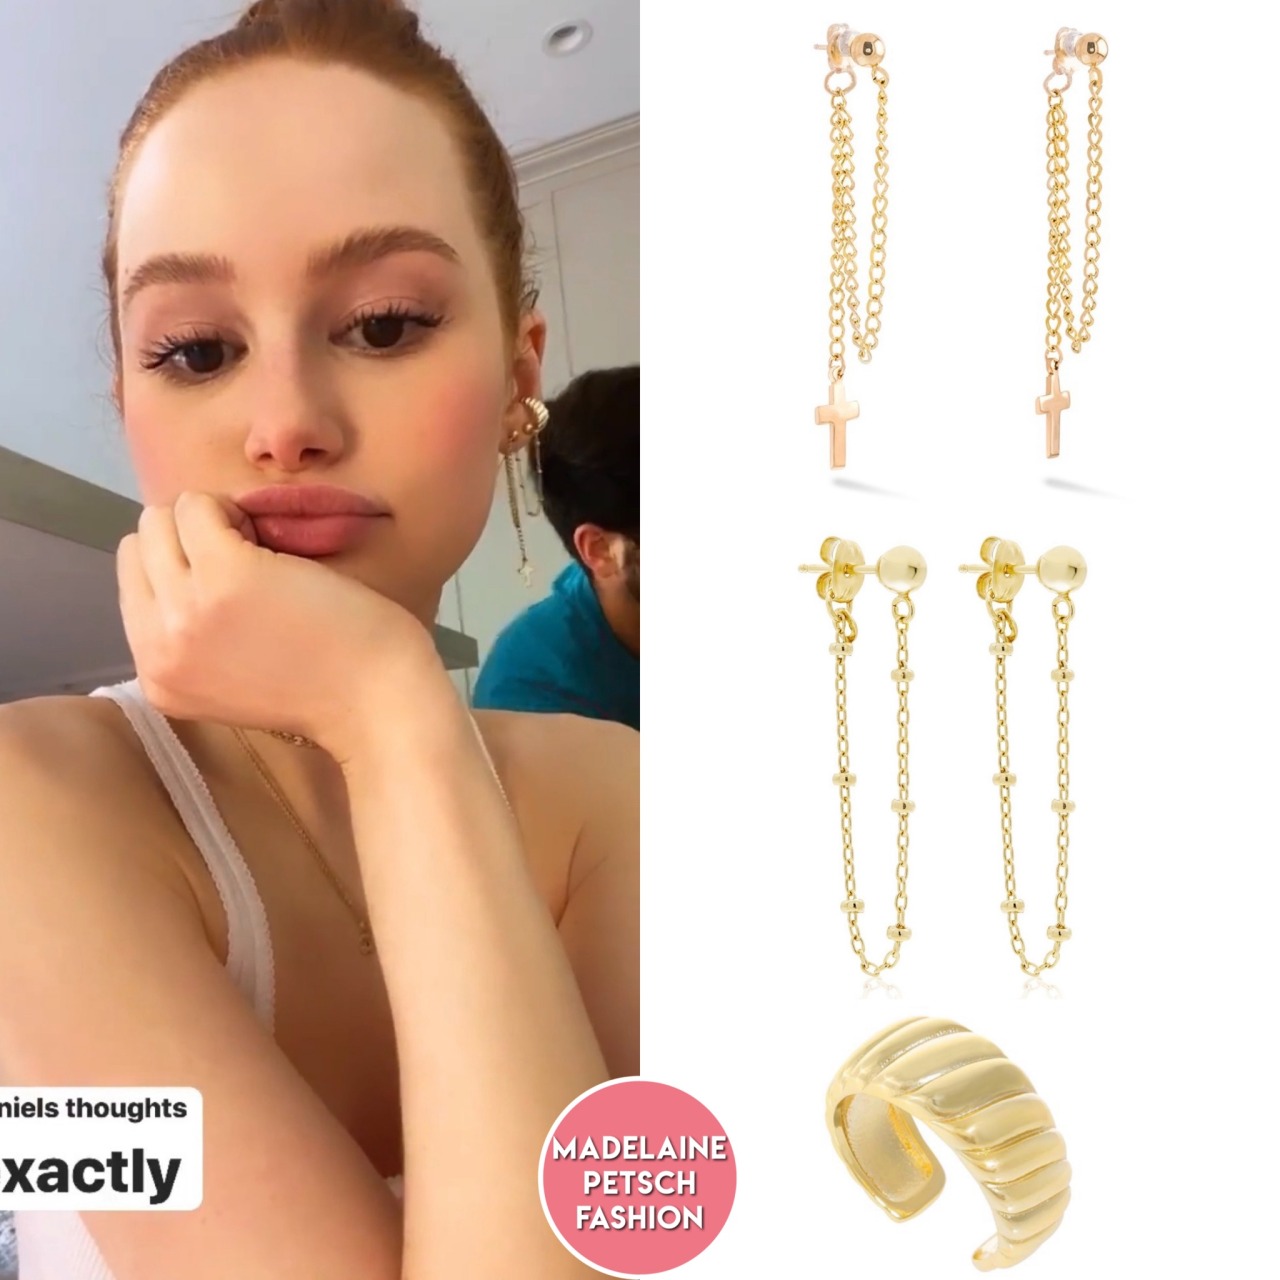 Madelaine Petsch Fashion — Instagram Story. Madelaine wore the Louis Vuitton